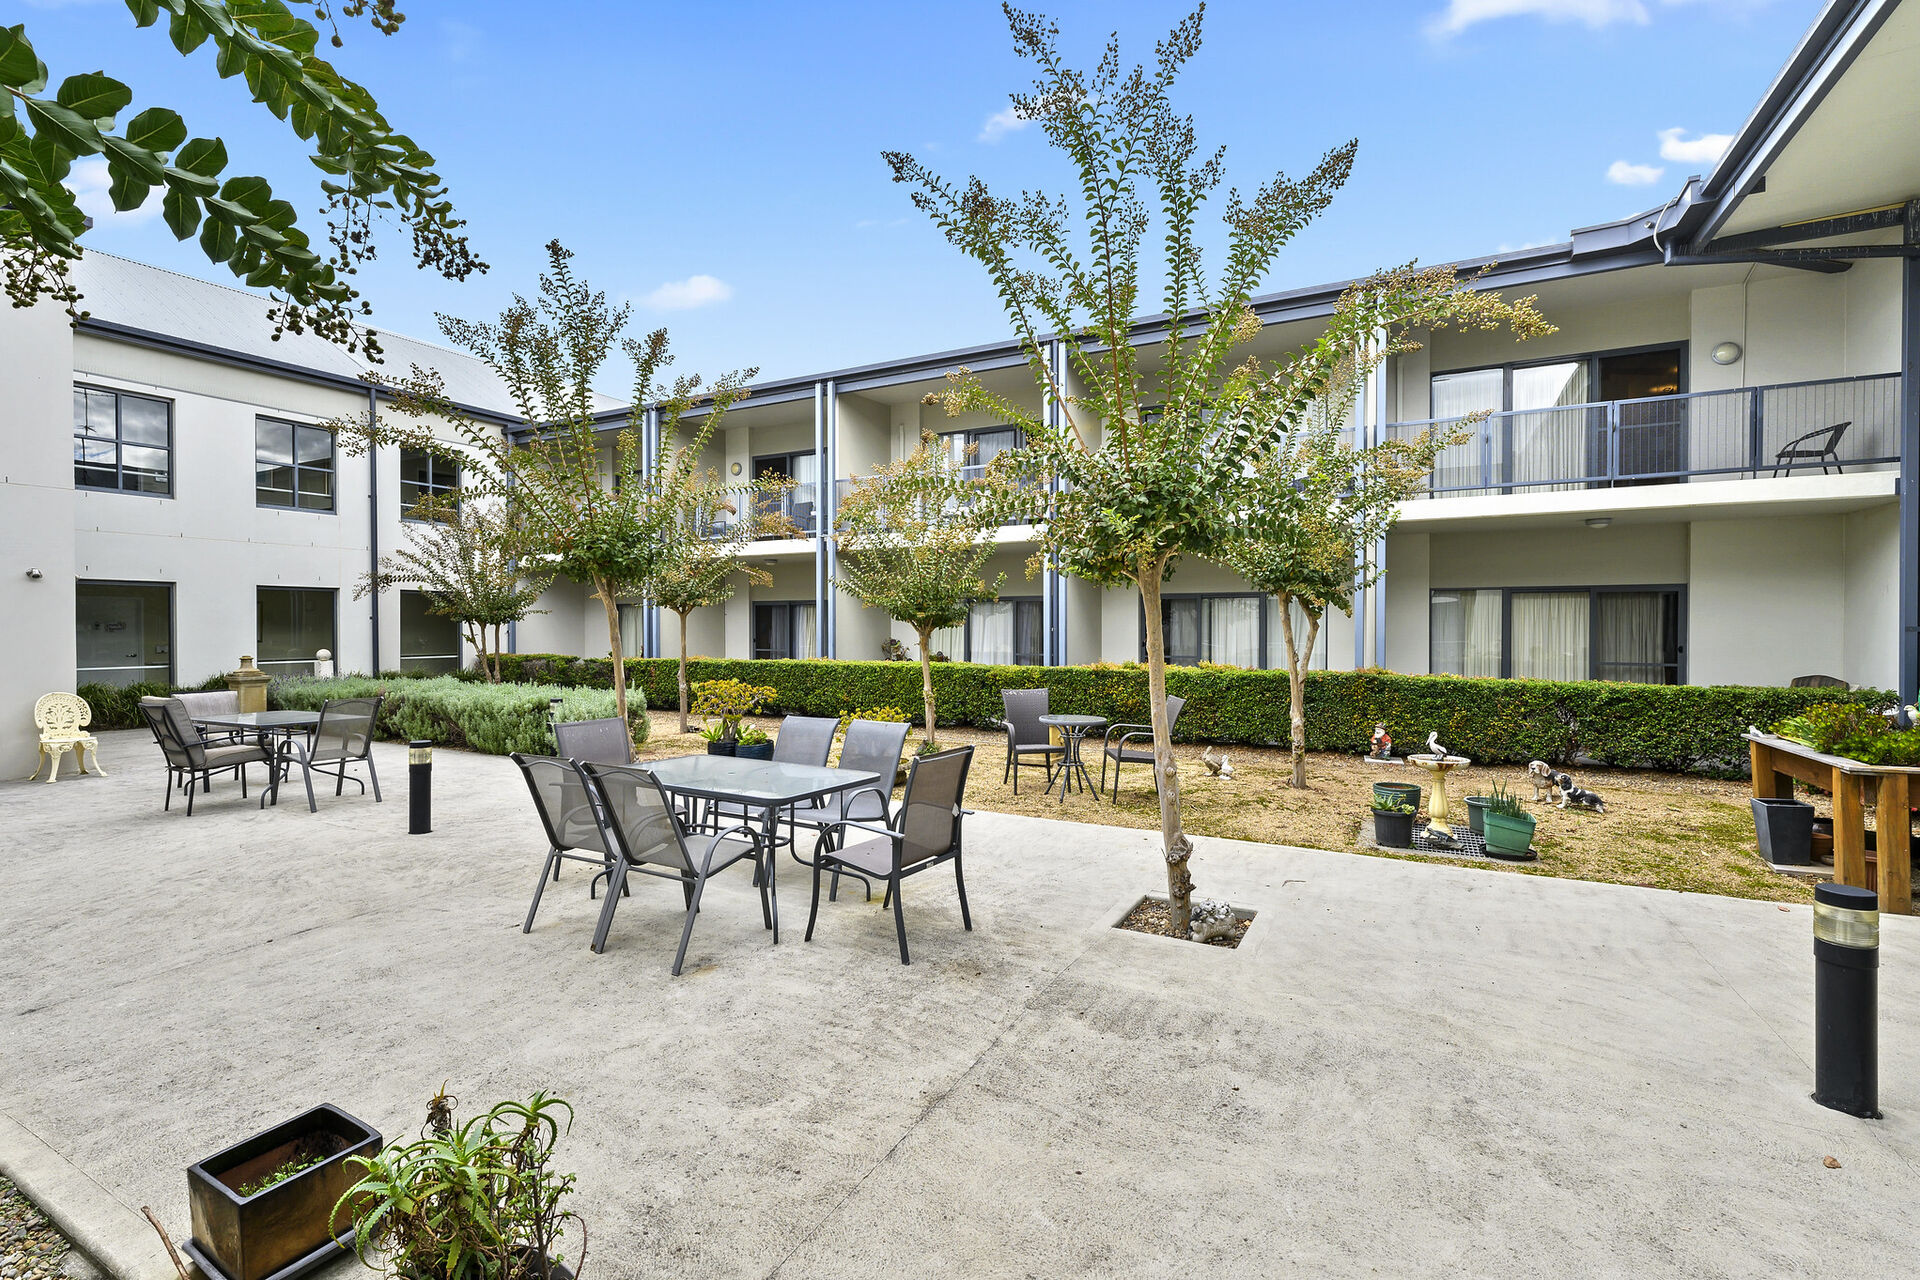 outdoor sitting area for nursing home residents at baptistcare durham green centre aged care home in menangle nsw